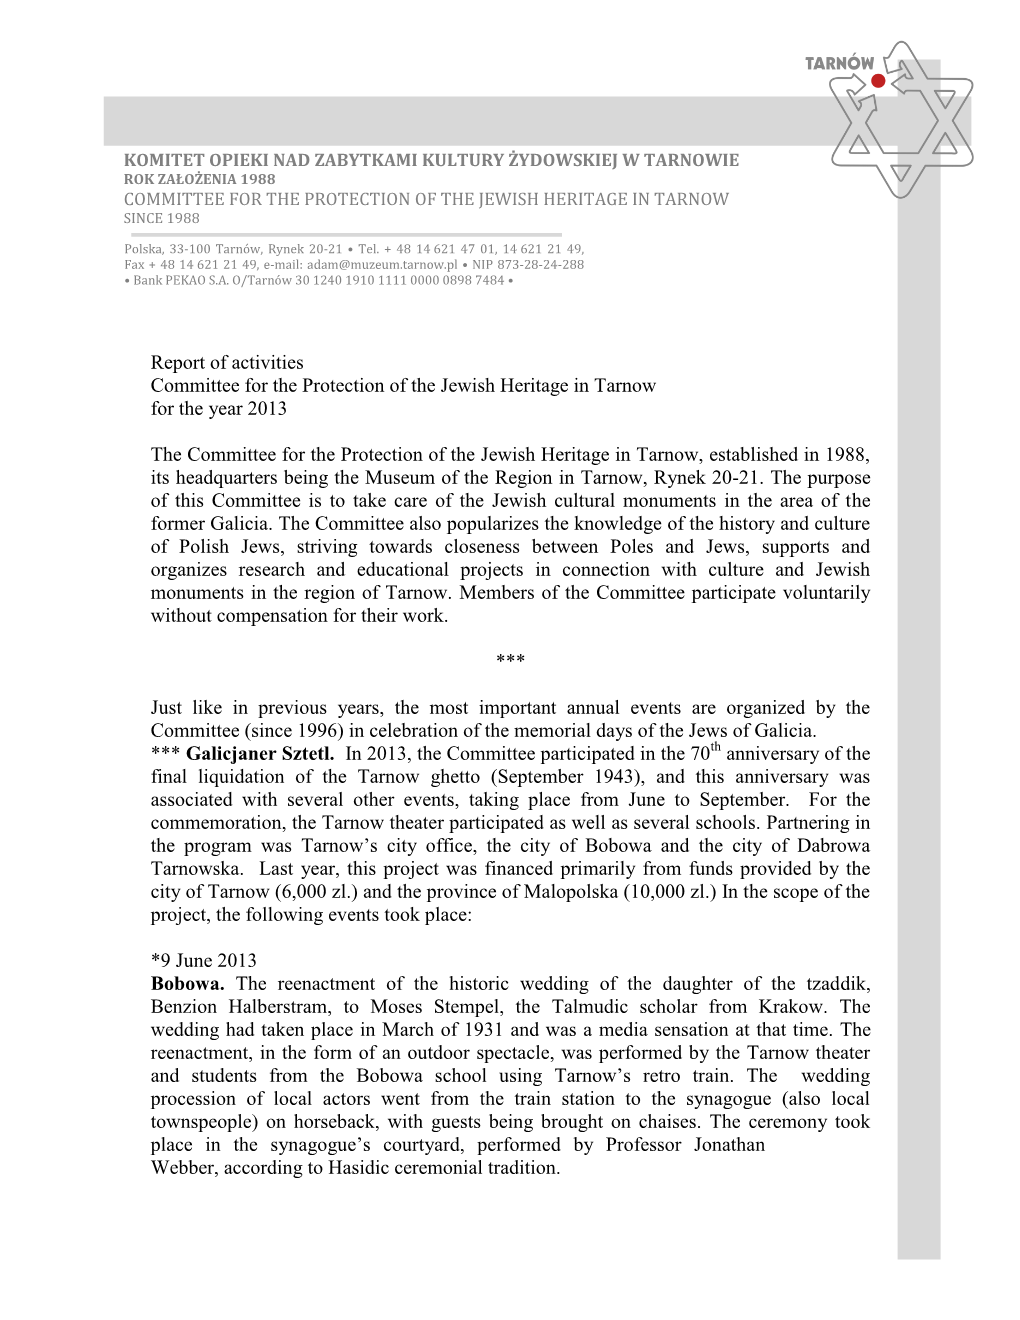 Report of Activities Committee for the Protection of the Jewish Heritage in Tarnow for the Year 2013